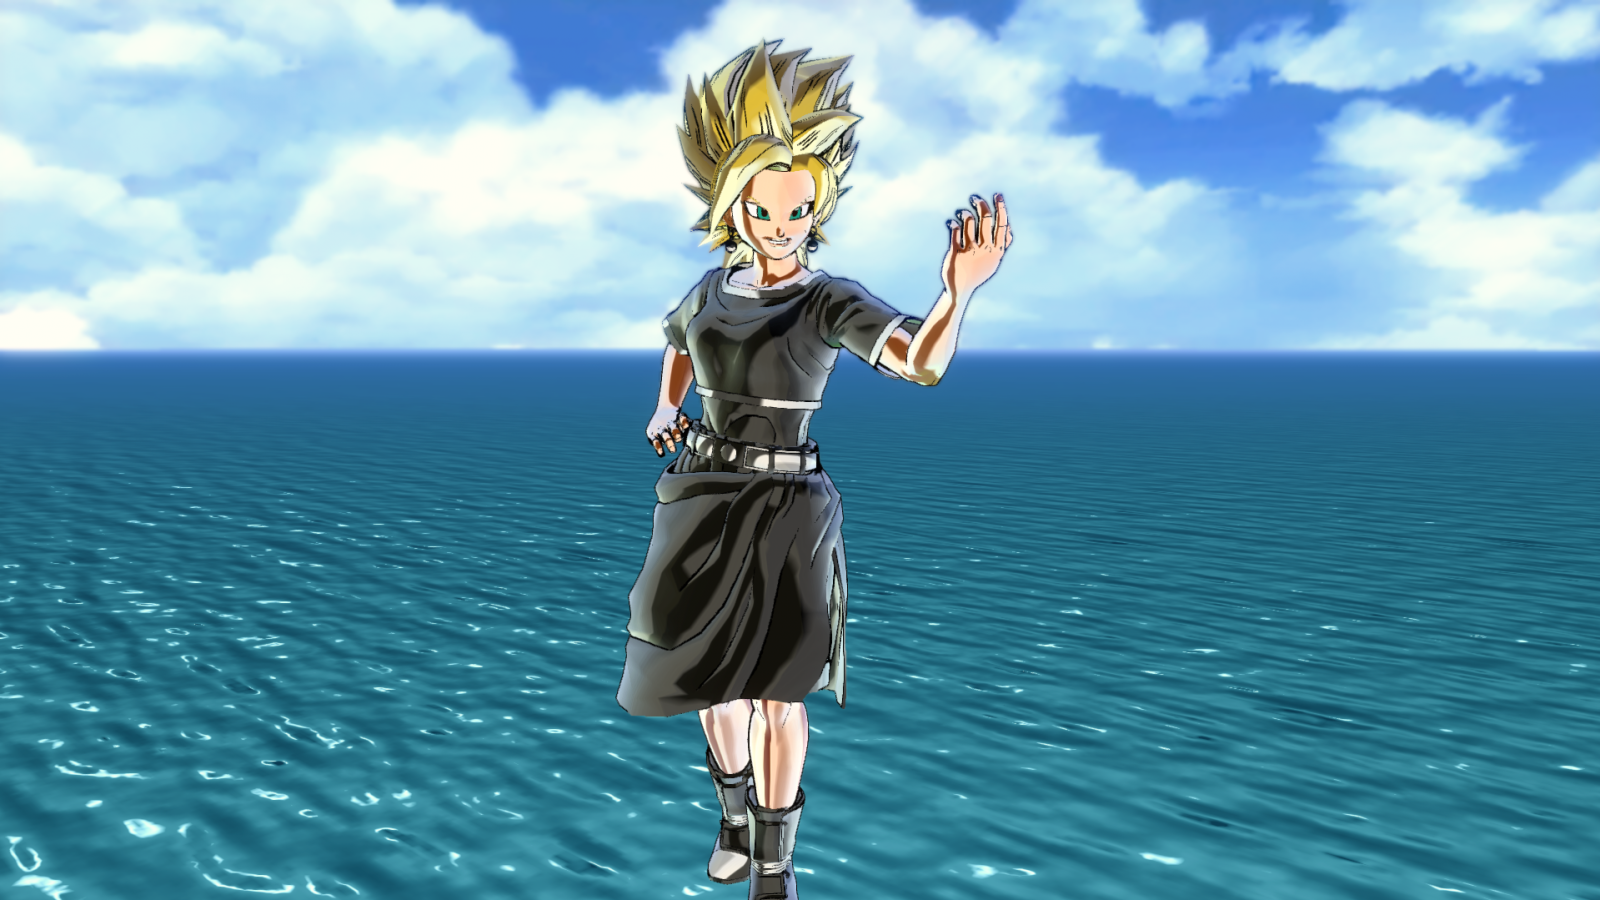 xenoverse 2 clothing replacer mod